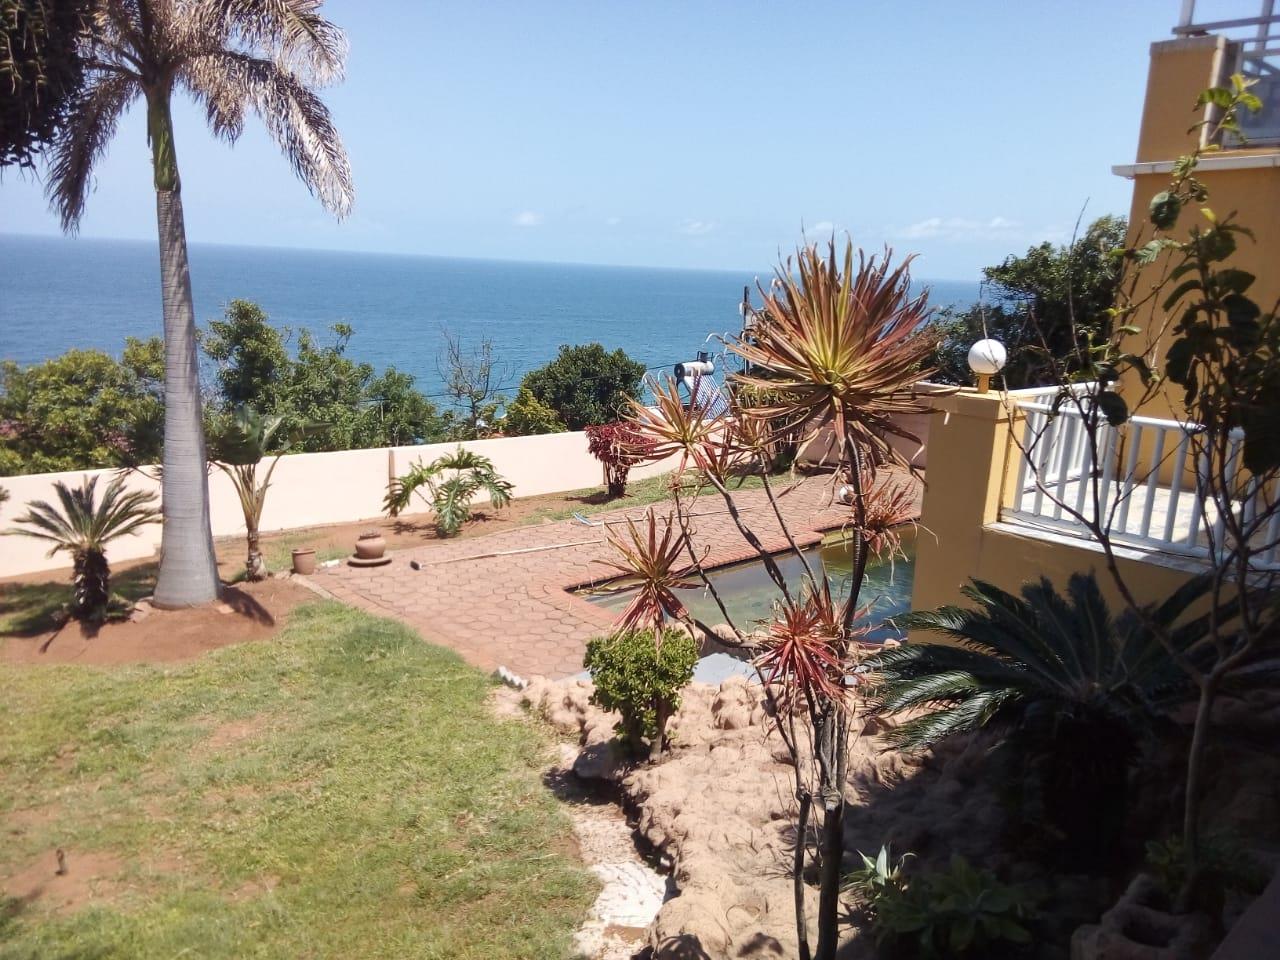 9 Bedroom House for Sale in Brighton Beach | Durban - South Africa | IA0001570847 | www.waterandnature.org